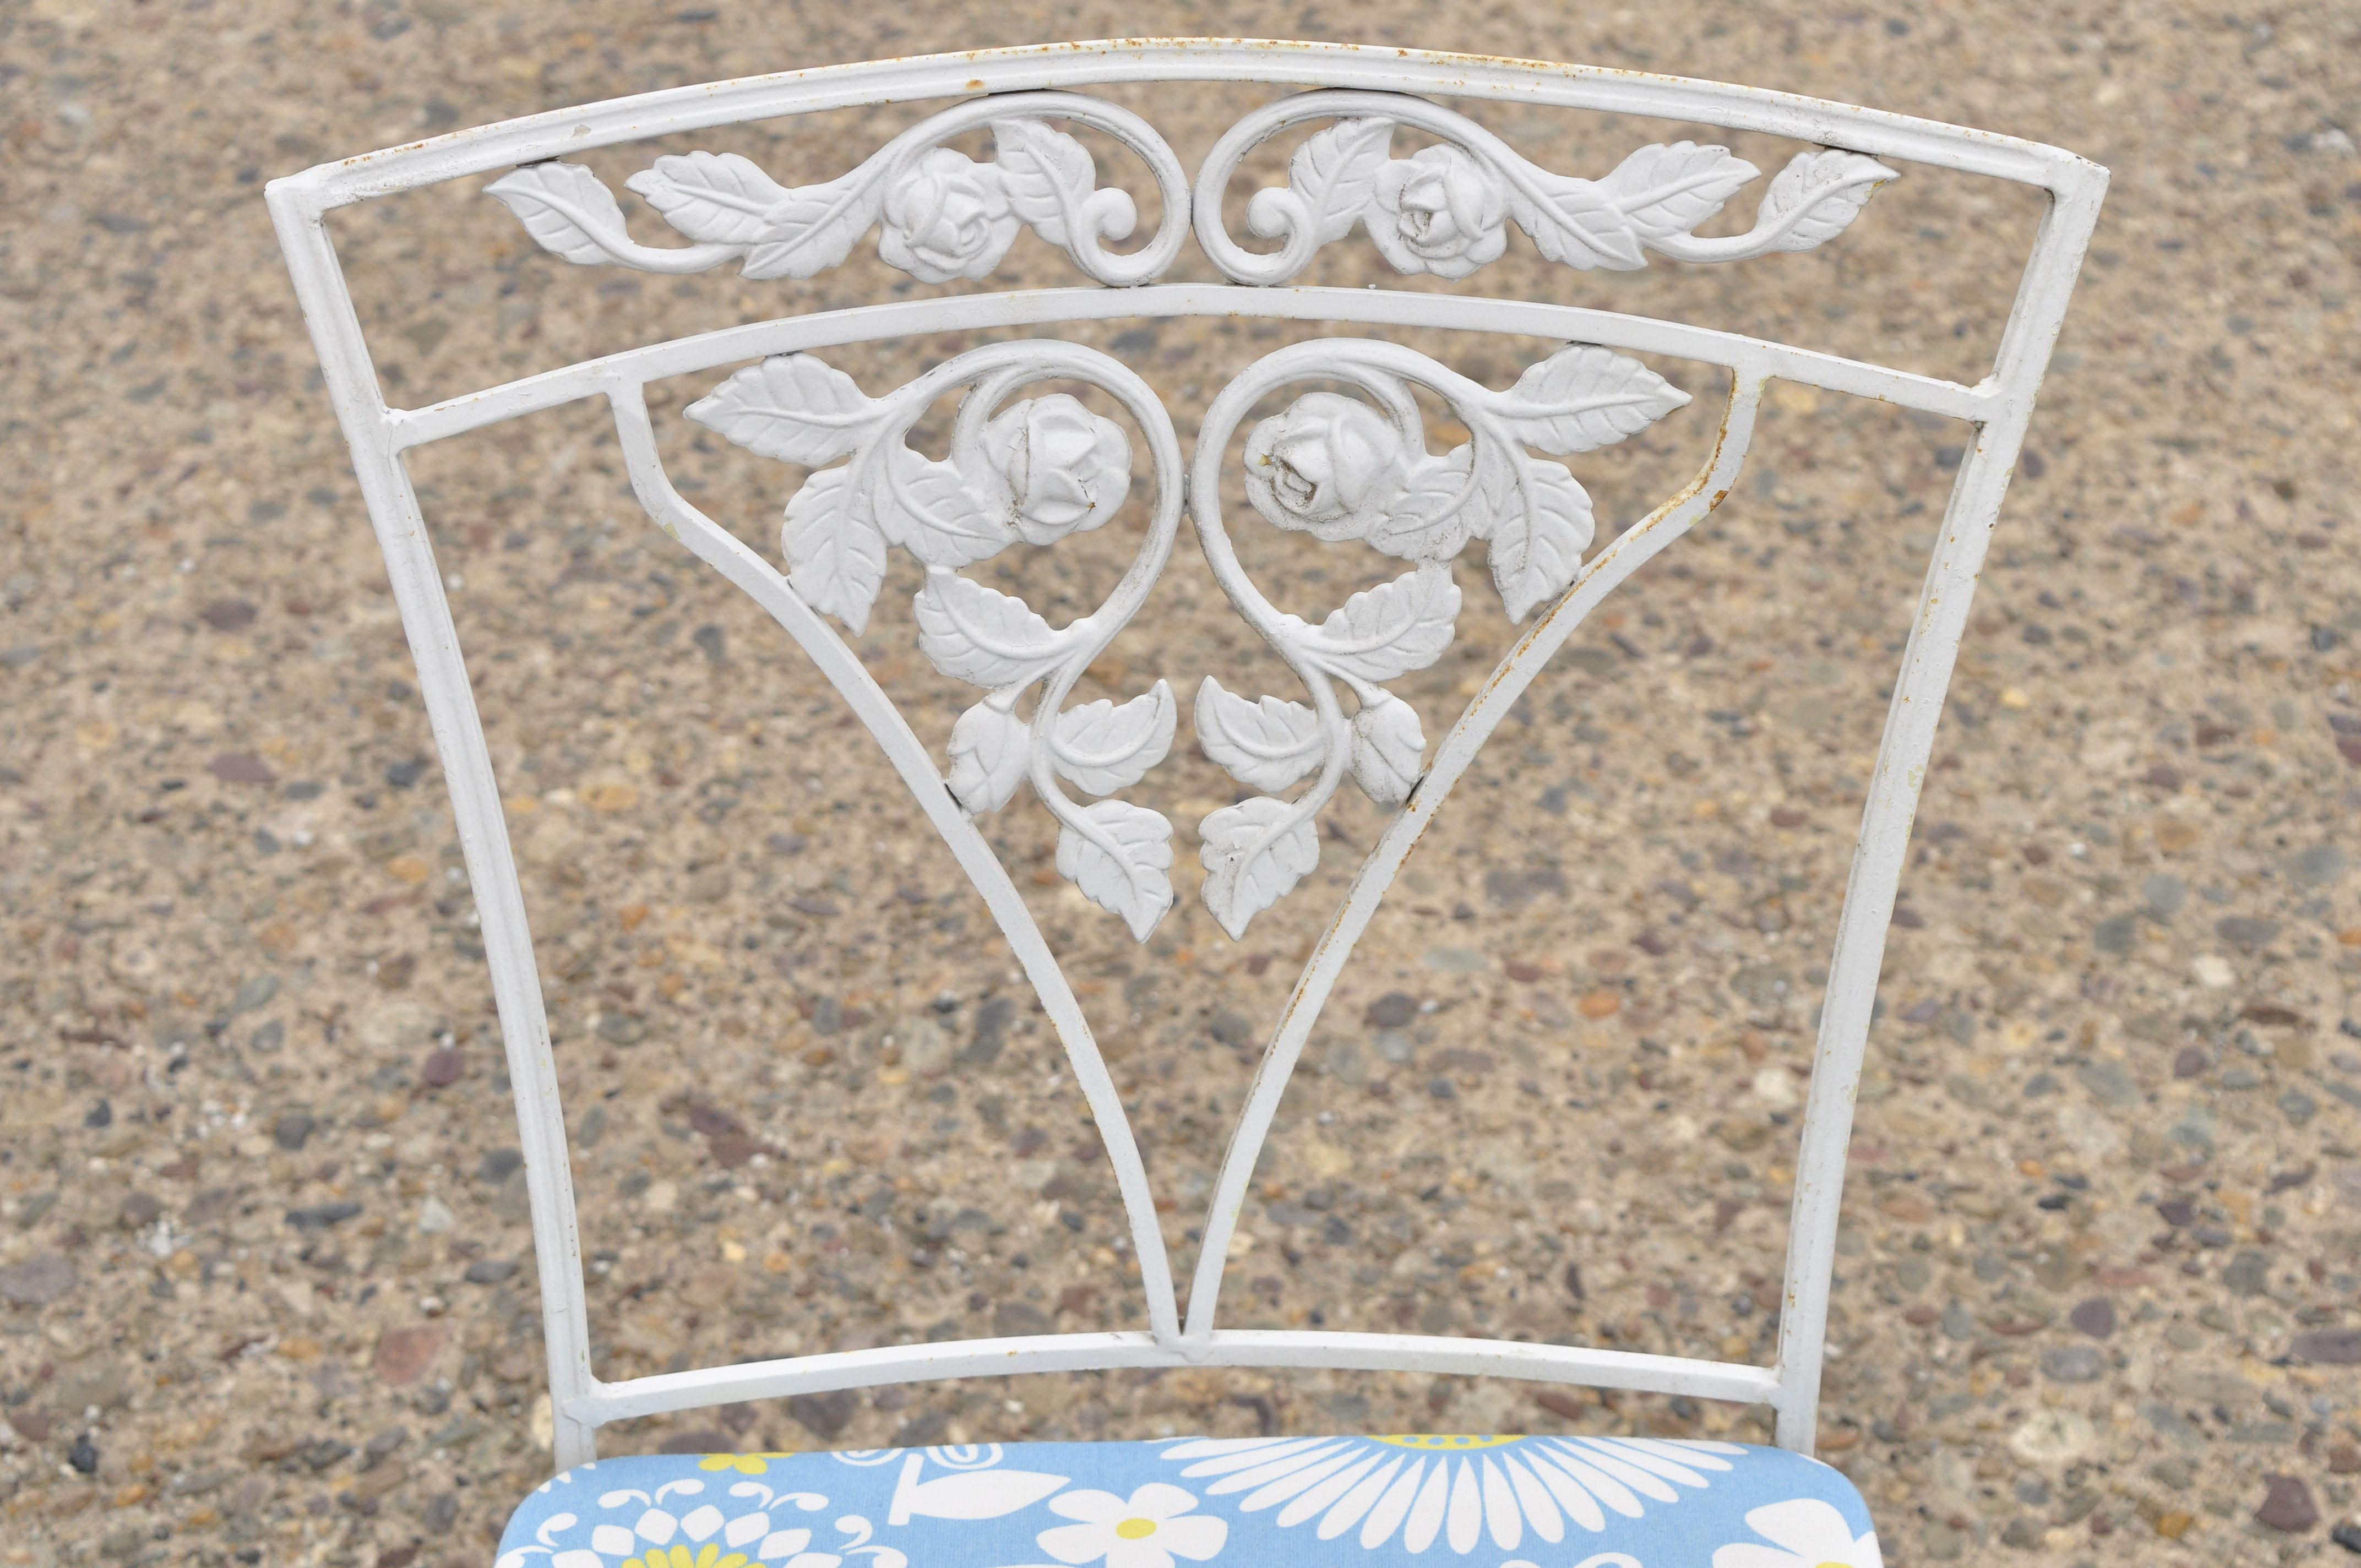 American Four Vintage Woodard Chantilly Rose Wrought Iron Patio Garden Dining Chairs